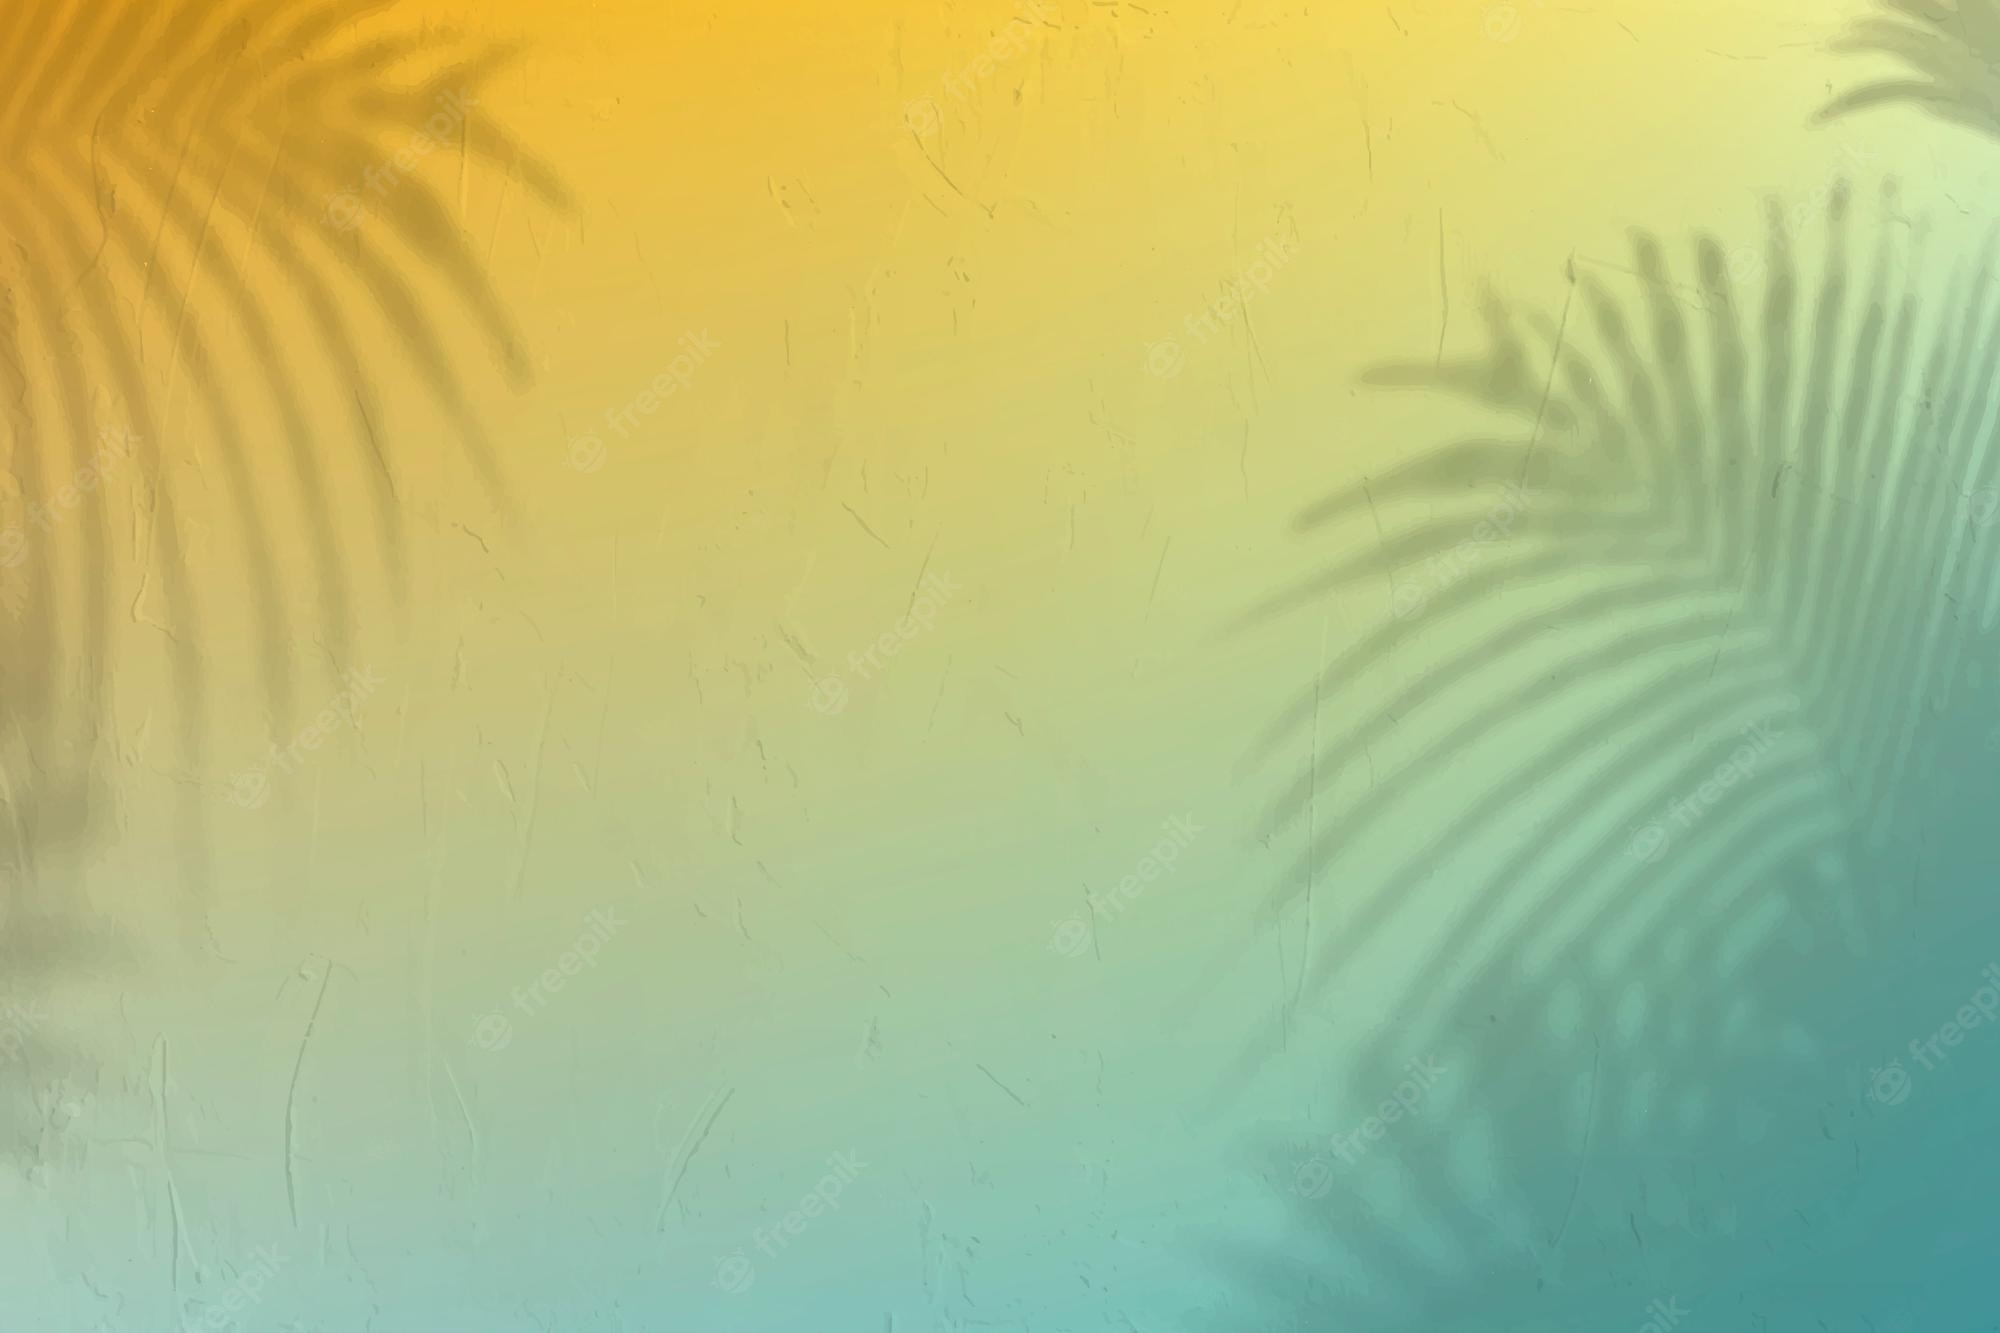 Abstract Summer Wallpapers